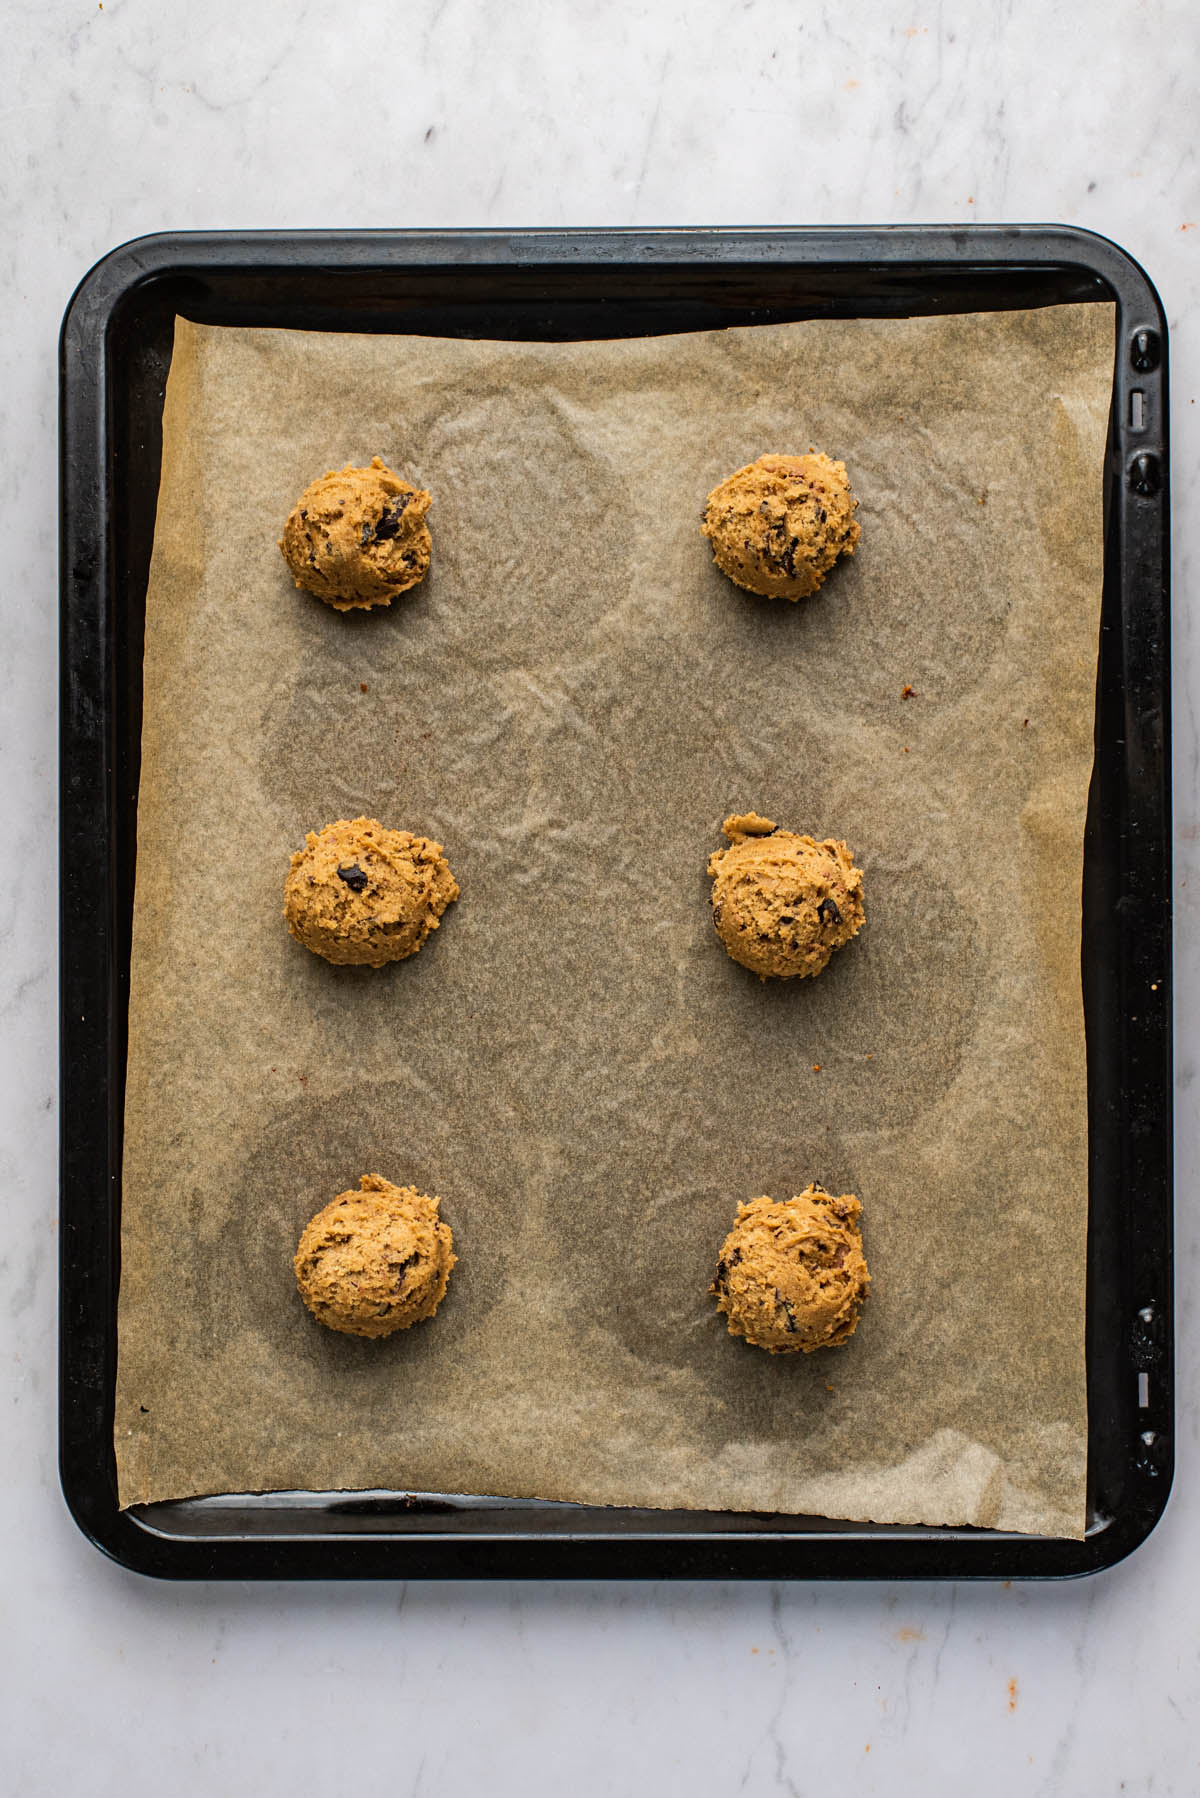 Six scoops of cookie dough on a lined baking sheet.